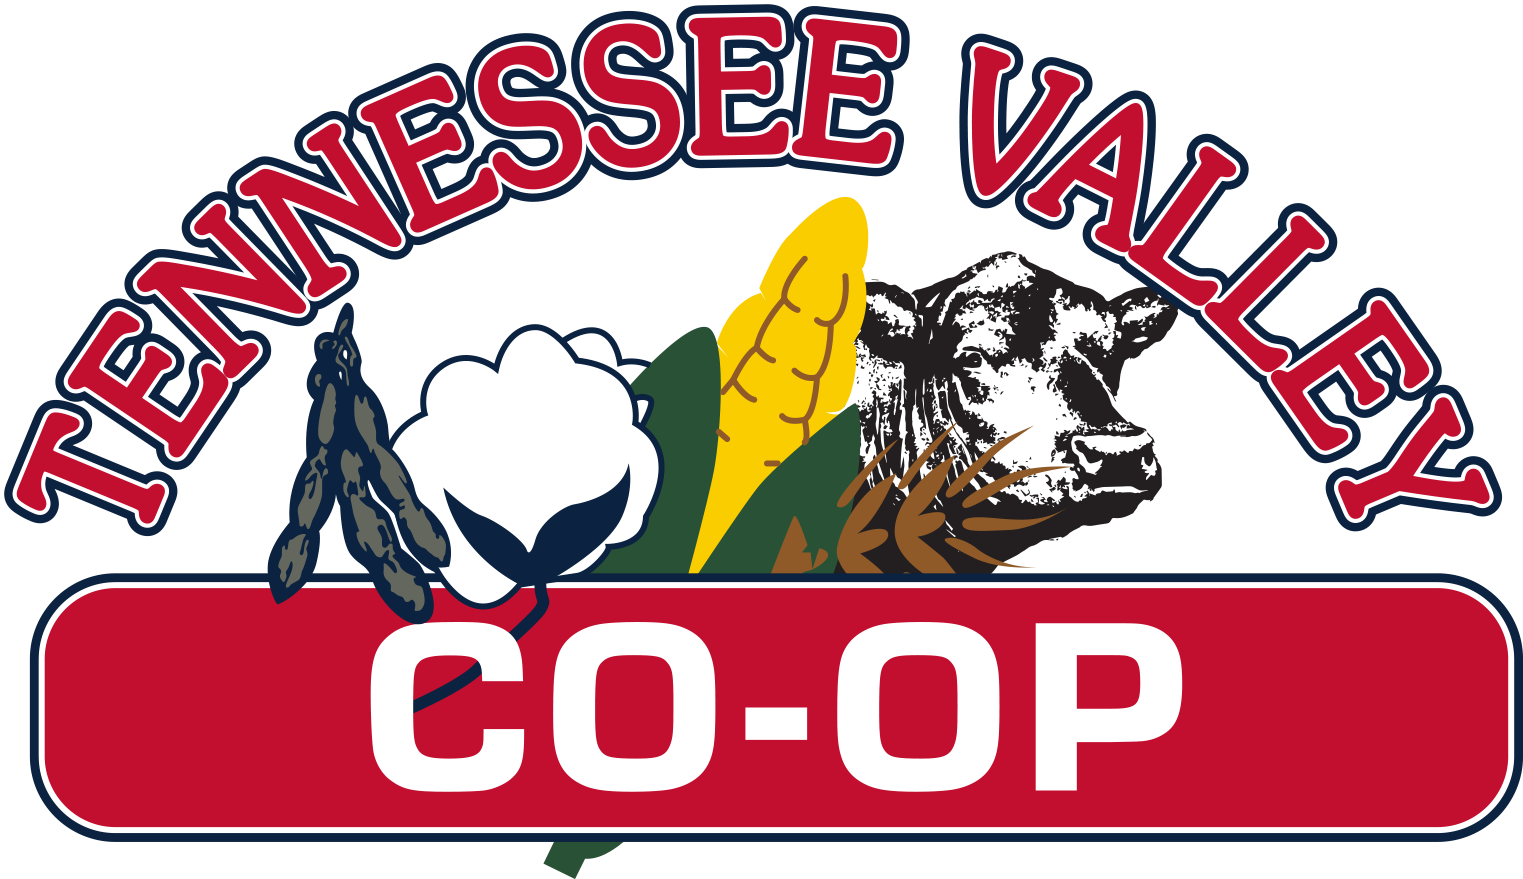 Tennessee Valley Coop